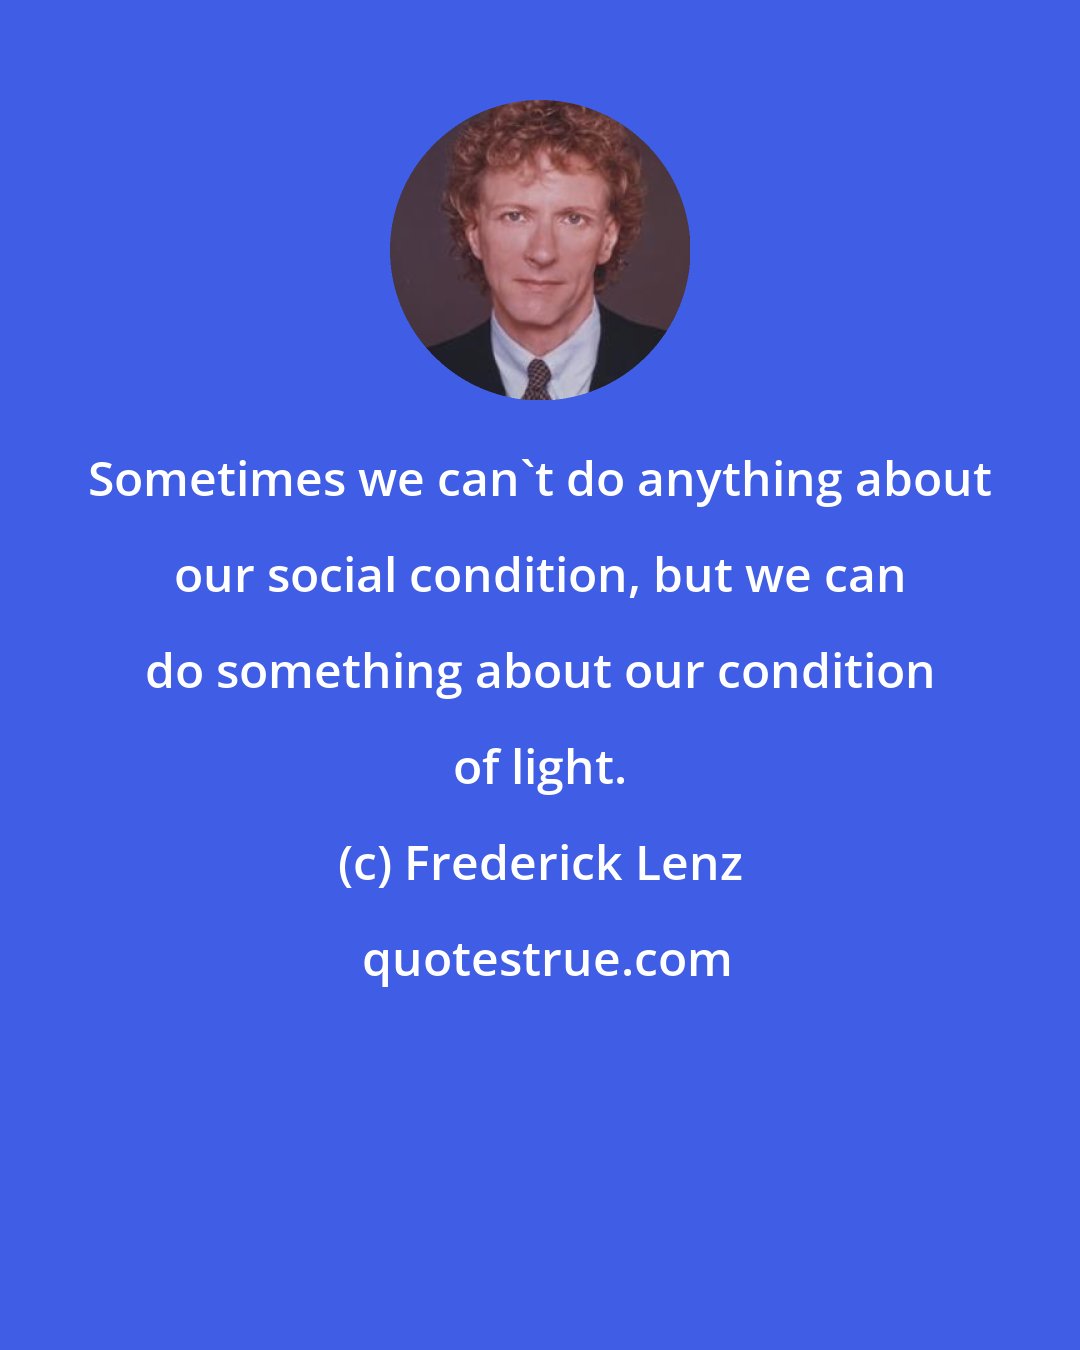 Frederick Lenz: Sometimes we can't do anything about our social condition, but we can do something about our condition of light.